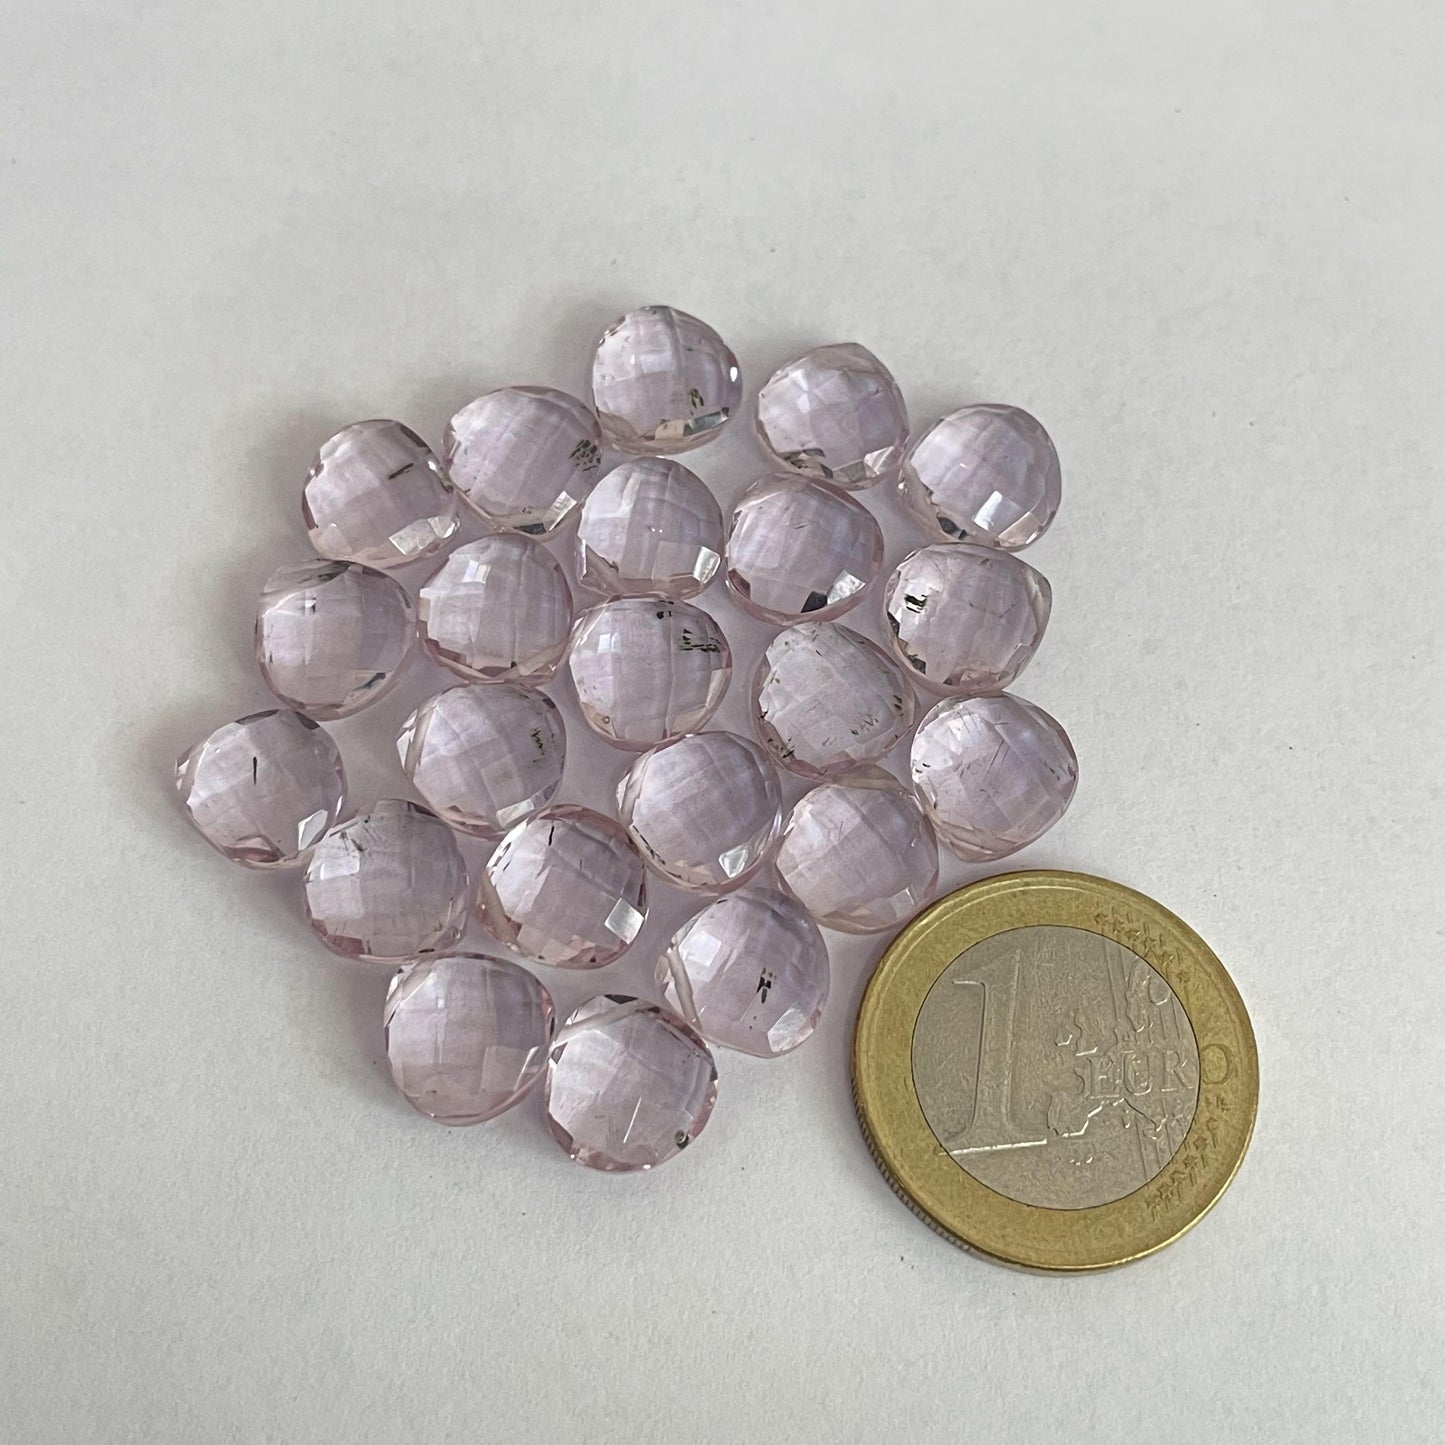 Kunzite Faceted Nice Quality (10 mm) Briolette (Lab-Created)